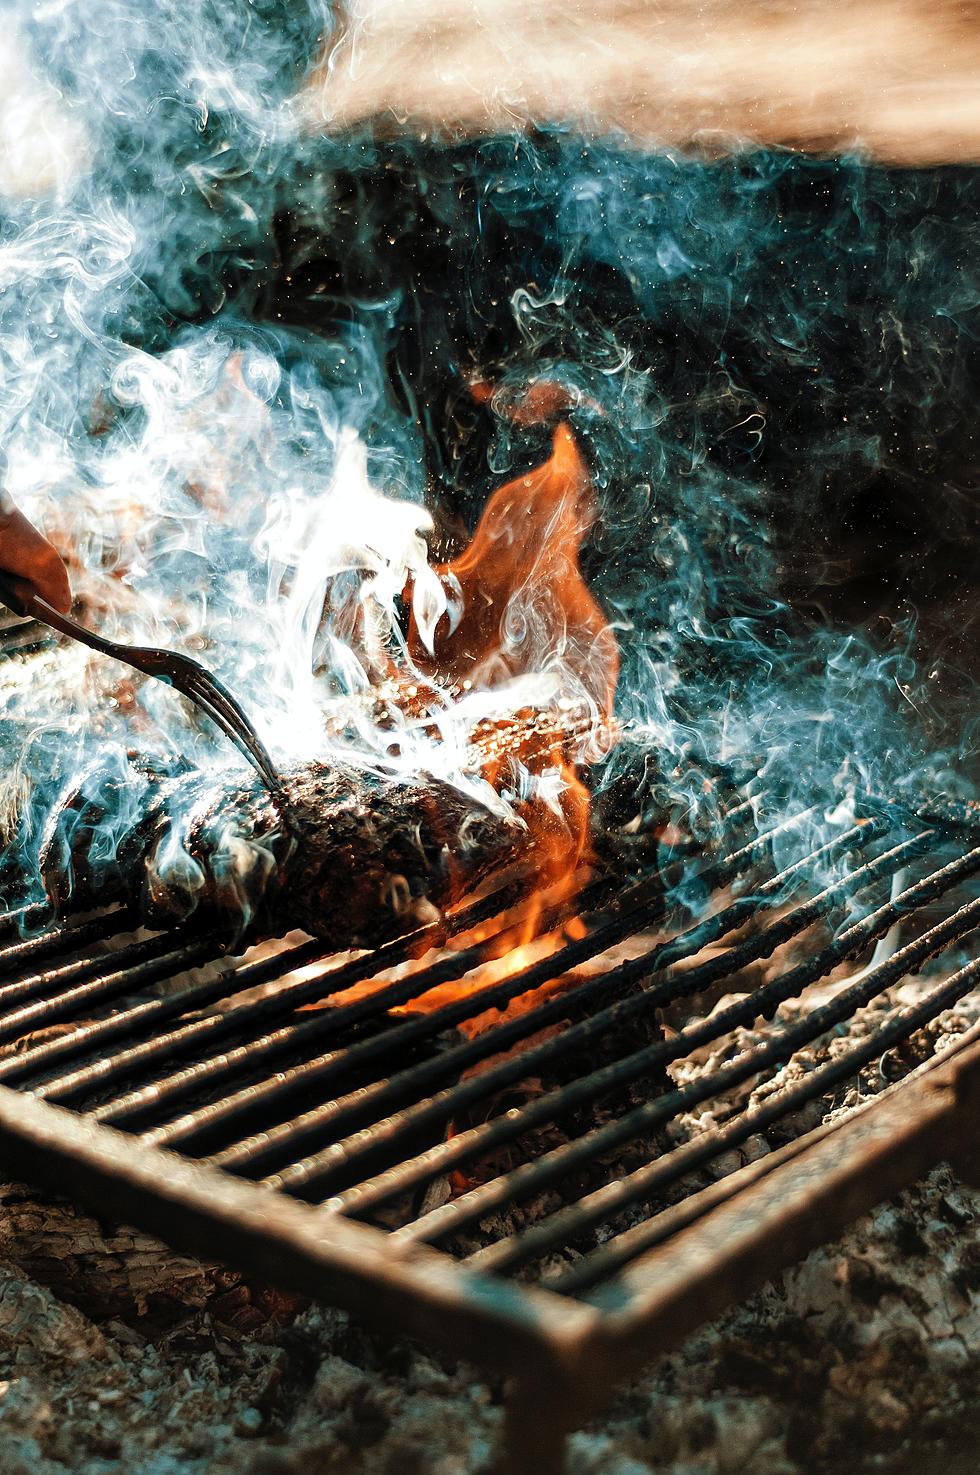 MU Doctor Reminds Wire BBQ Grill Brushes Can Cause Injuries - MU